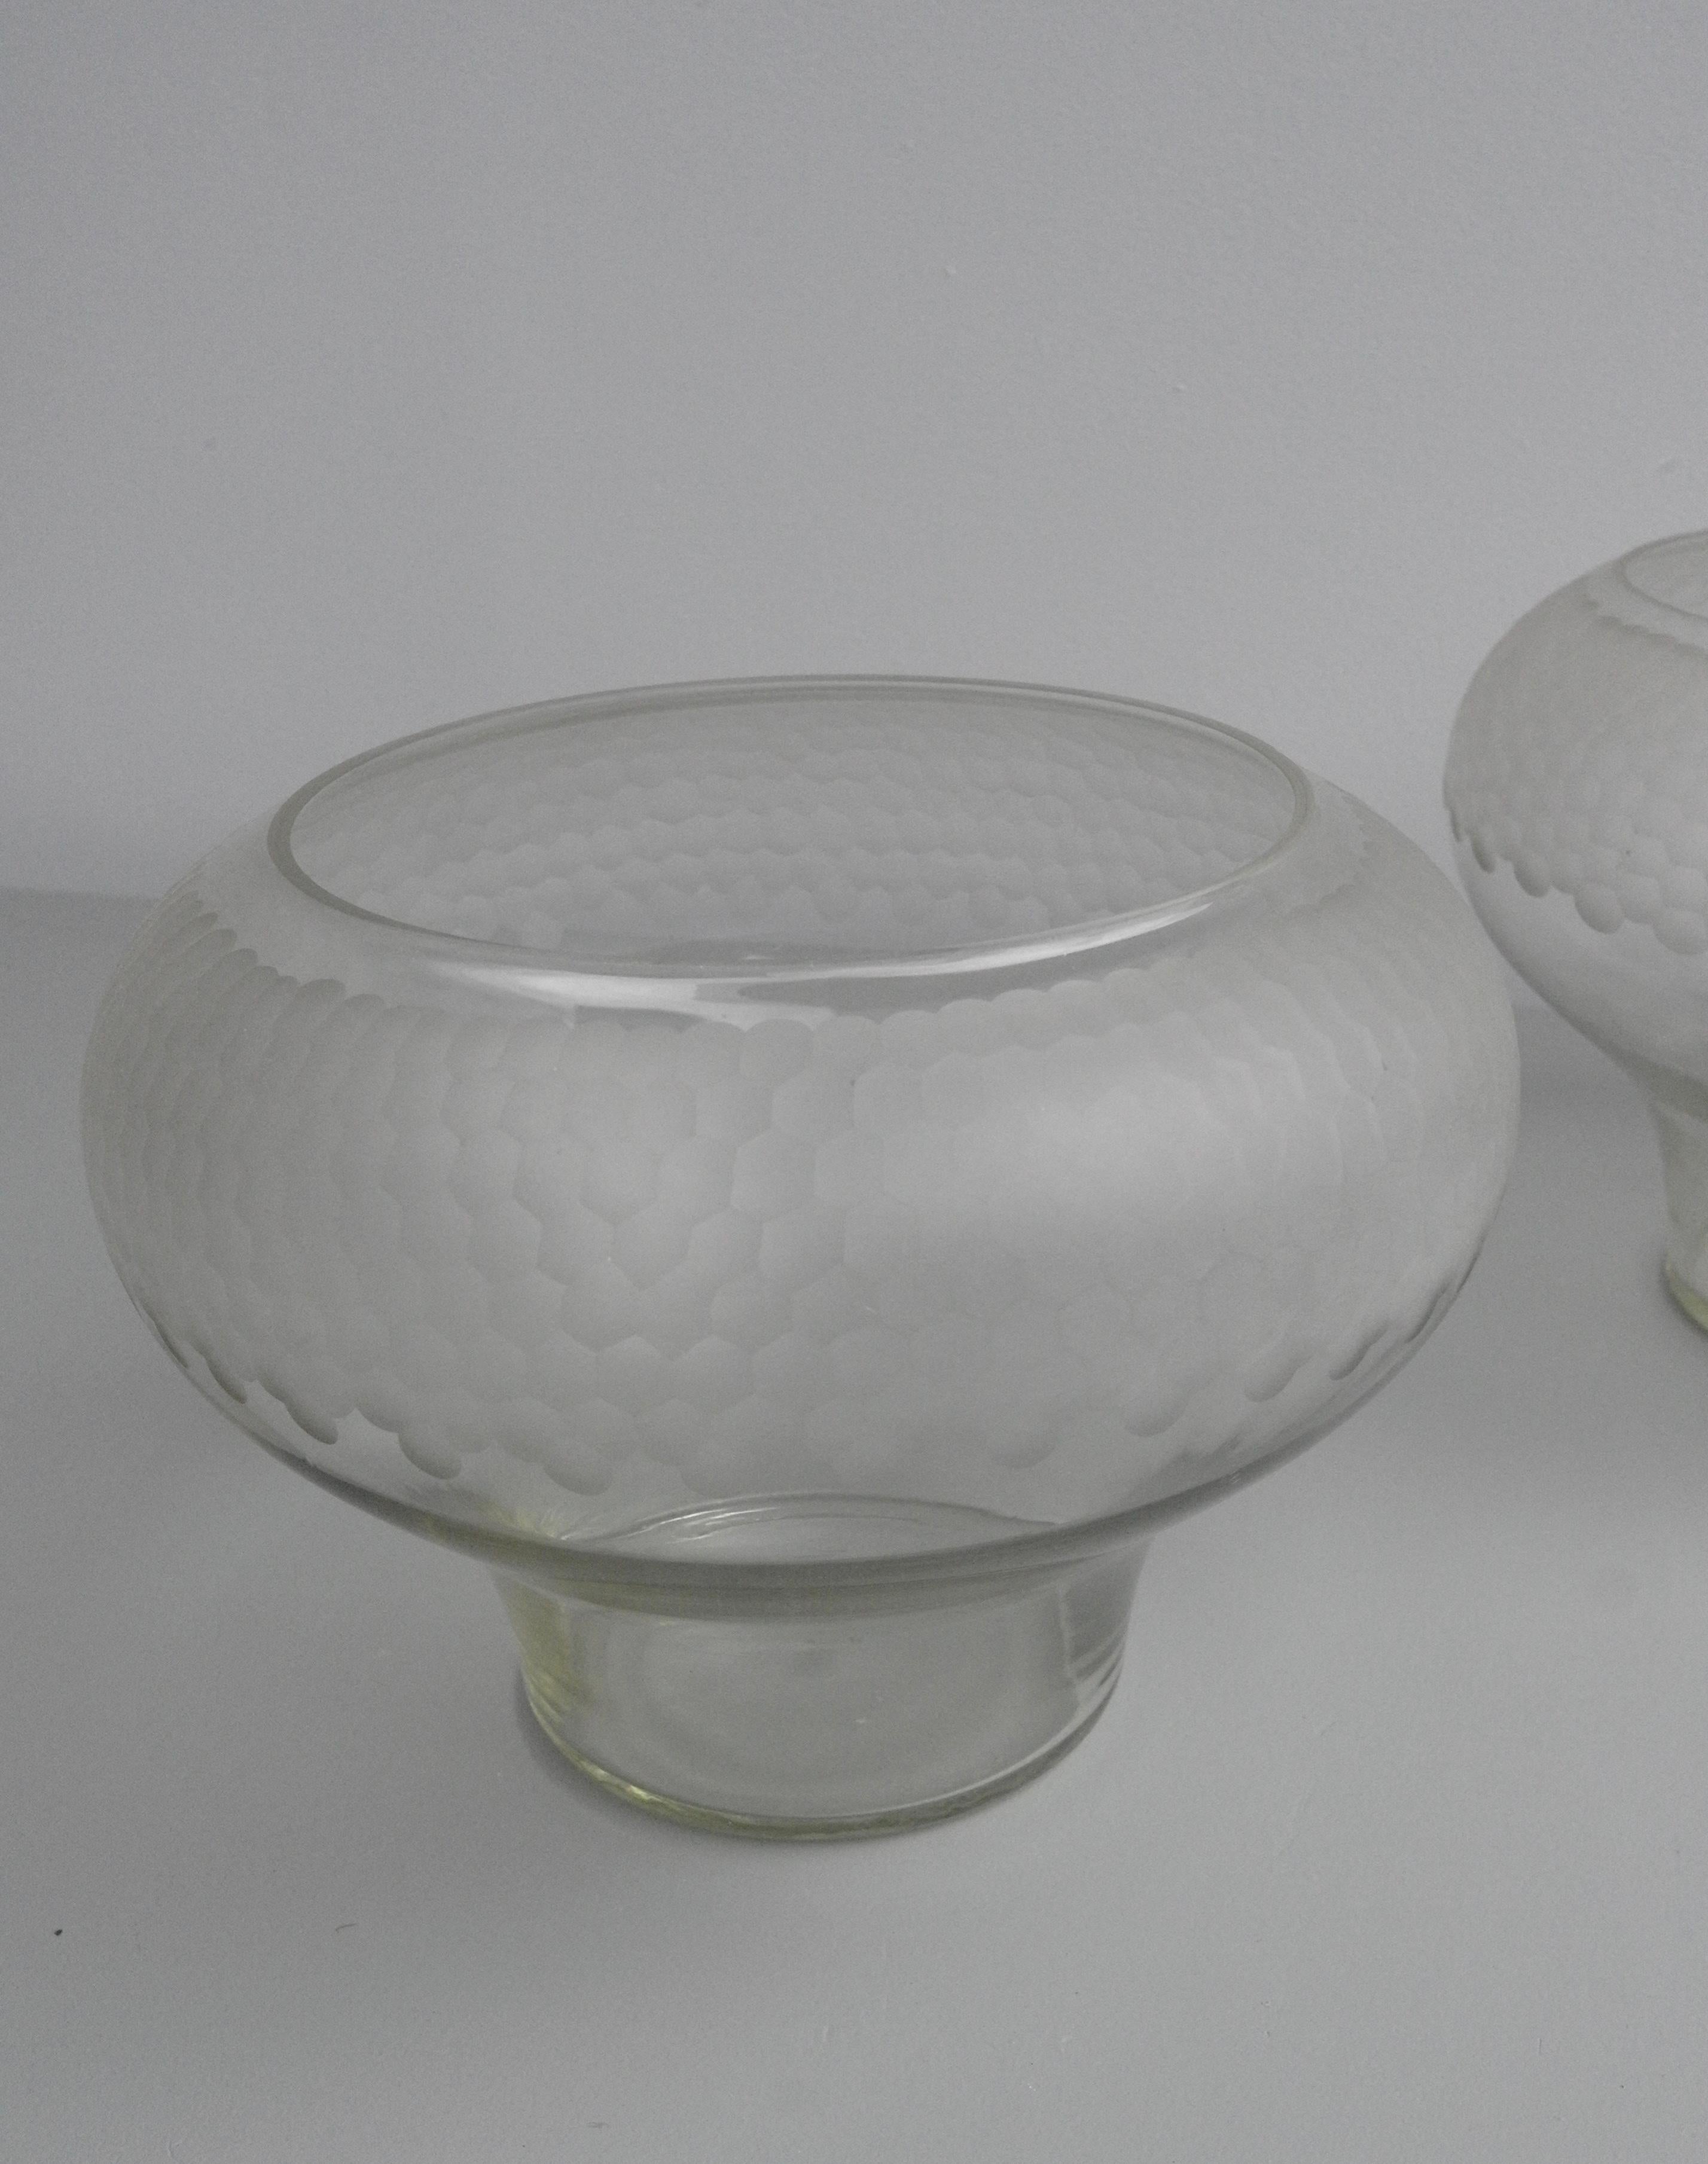 Pair of Large Decorative Honeycomb Midcentury Glass Bowl Vases For Sale 2